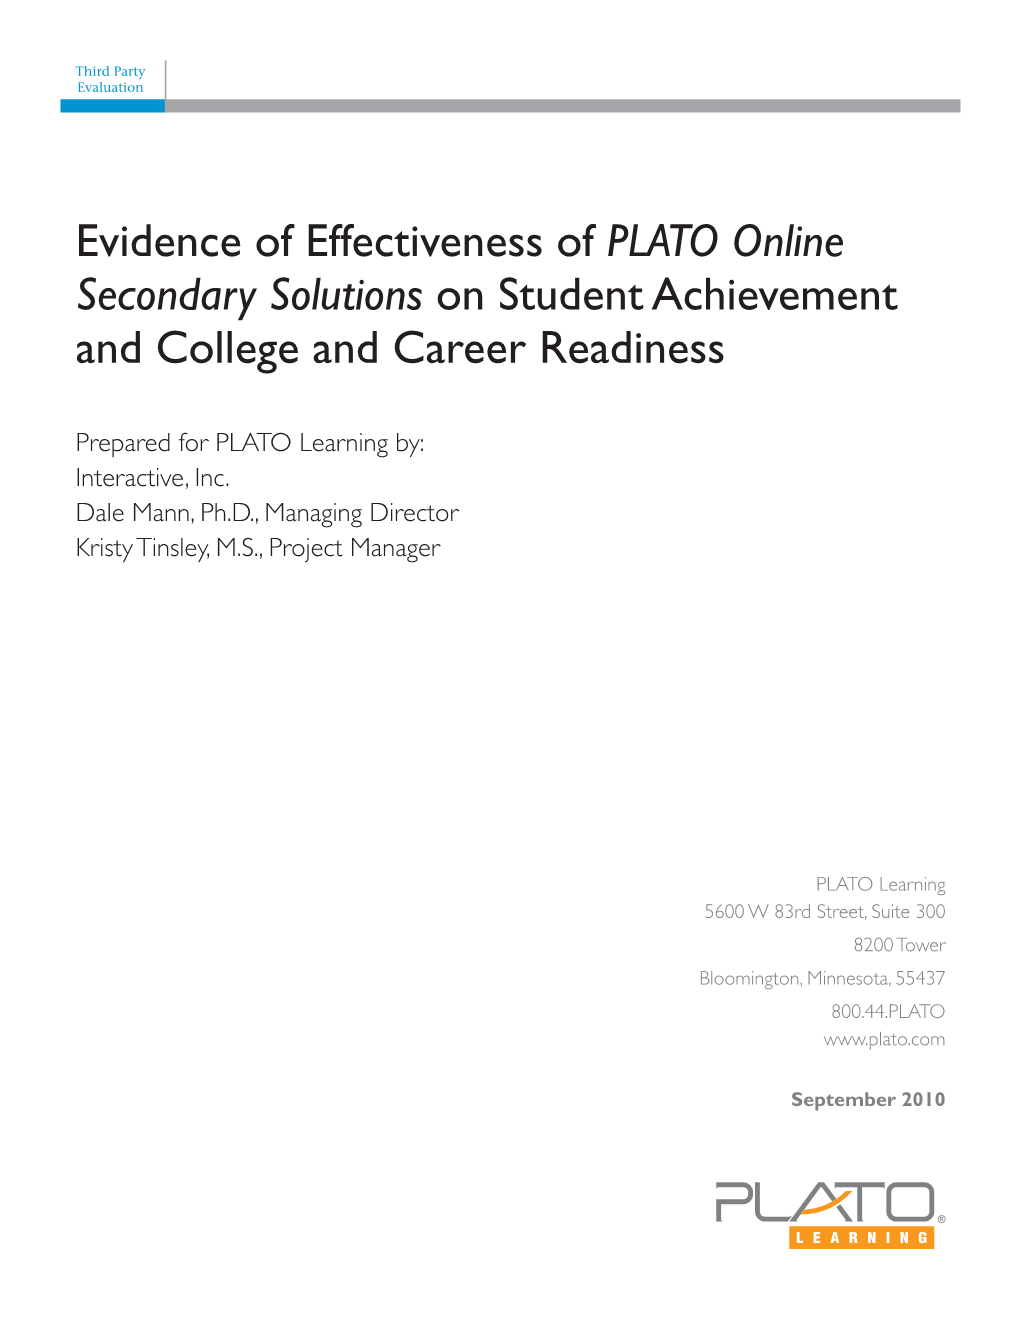 Evidence of Effectiveness of PLATO Online Secondary Solutions on Student Achievement and College and Career Readiness